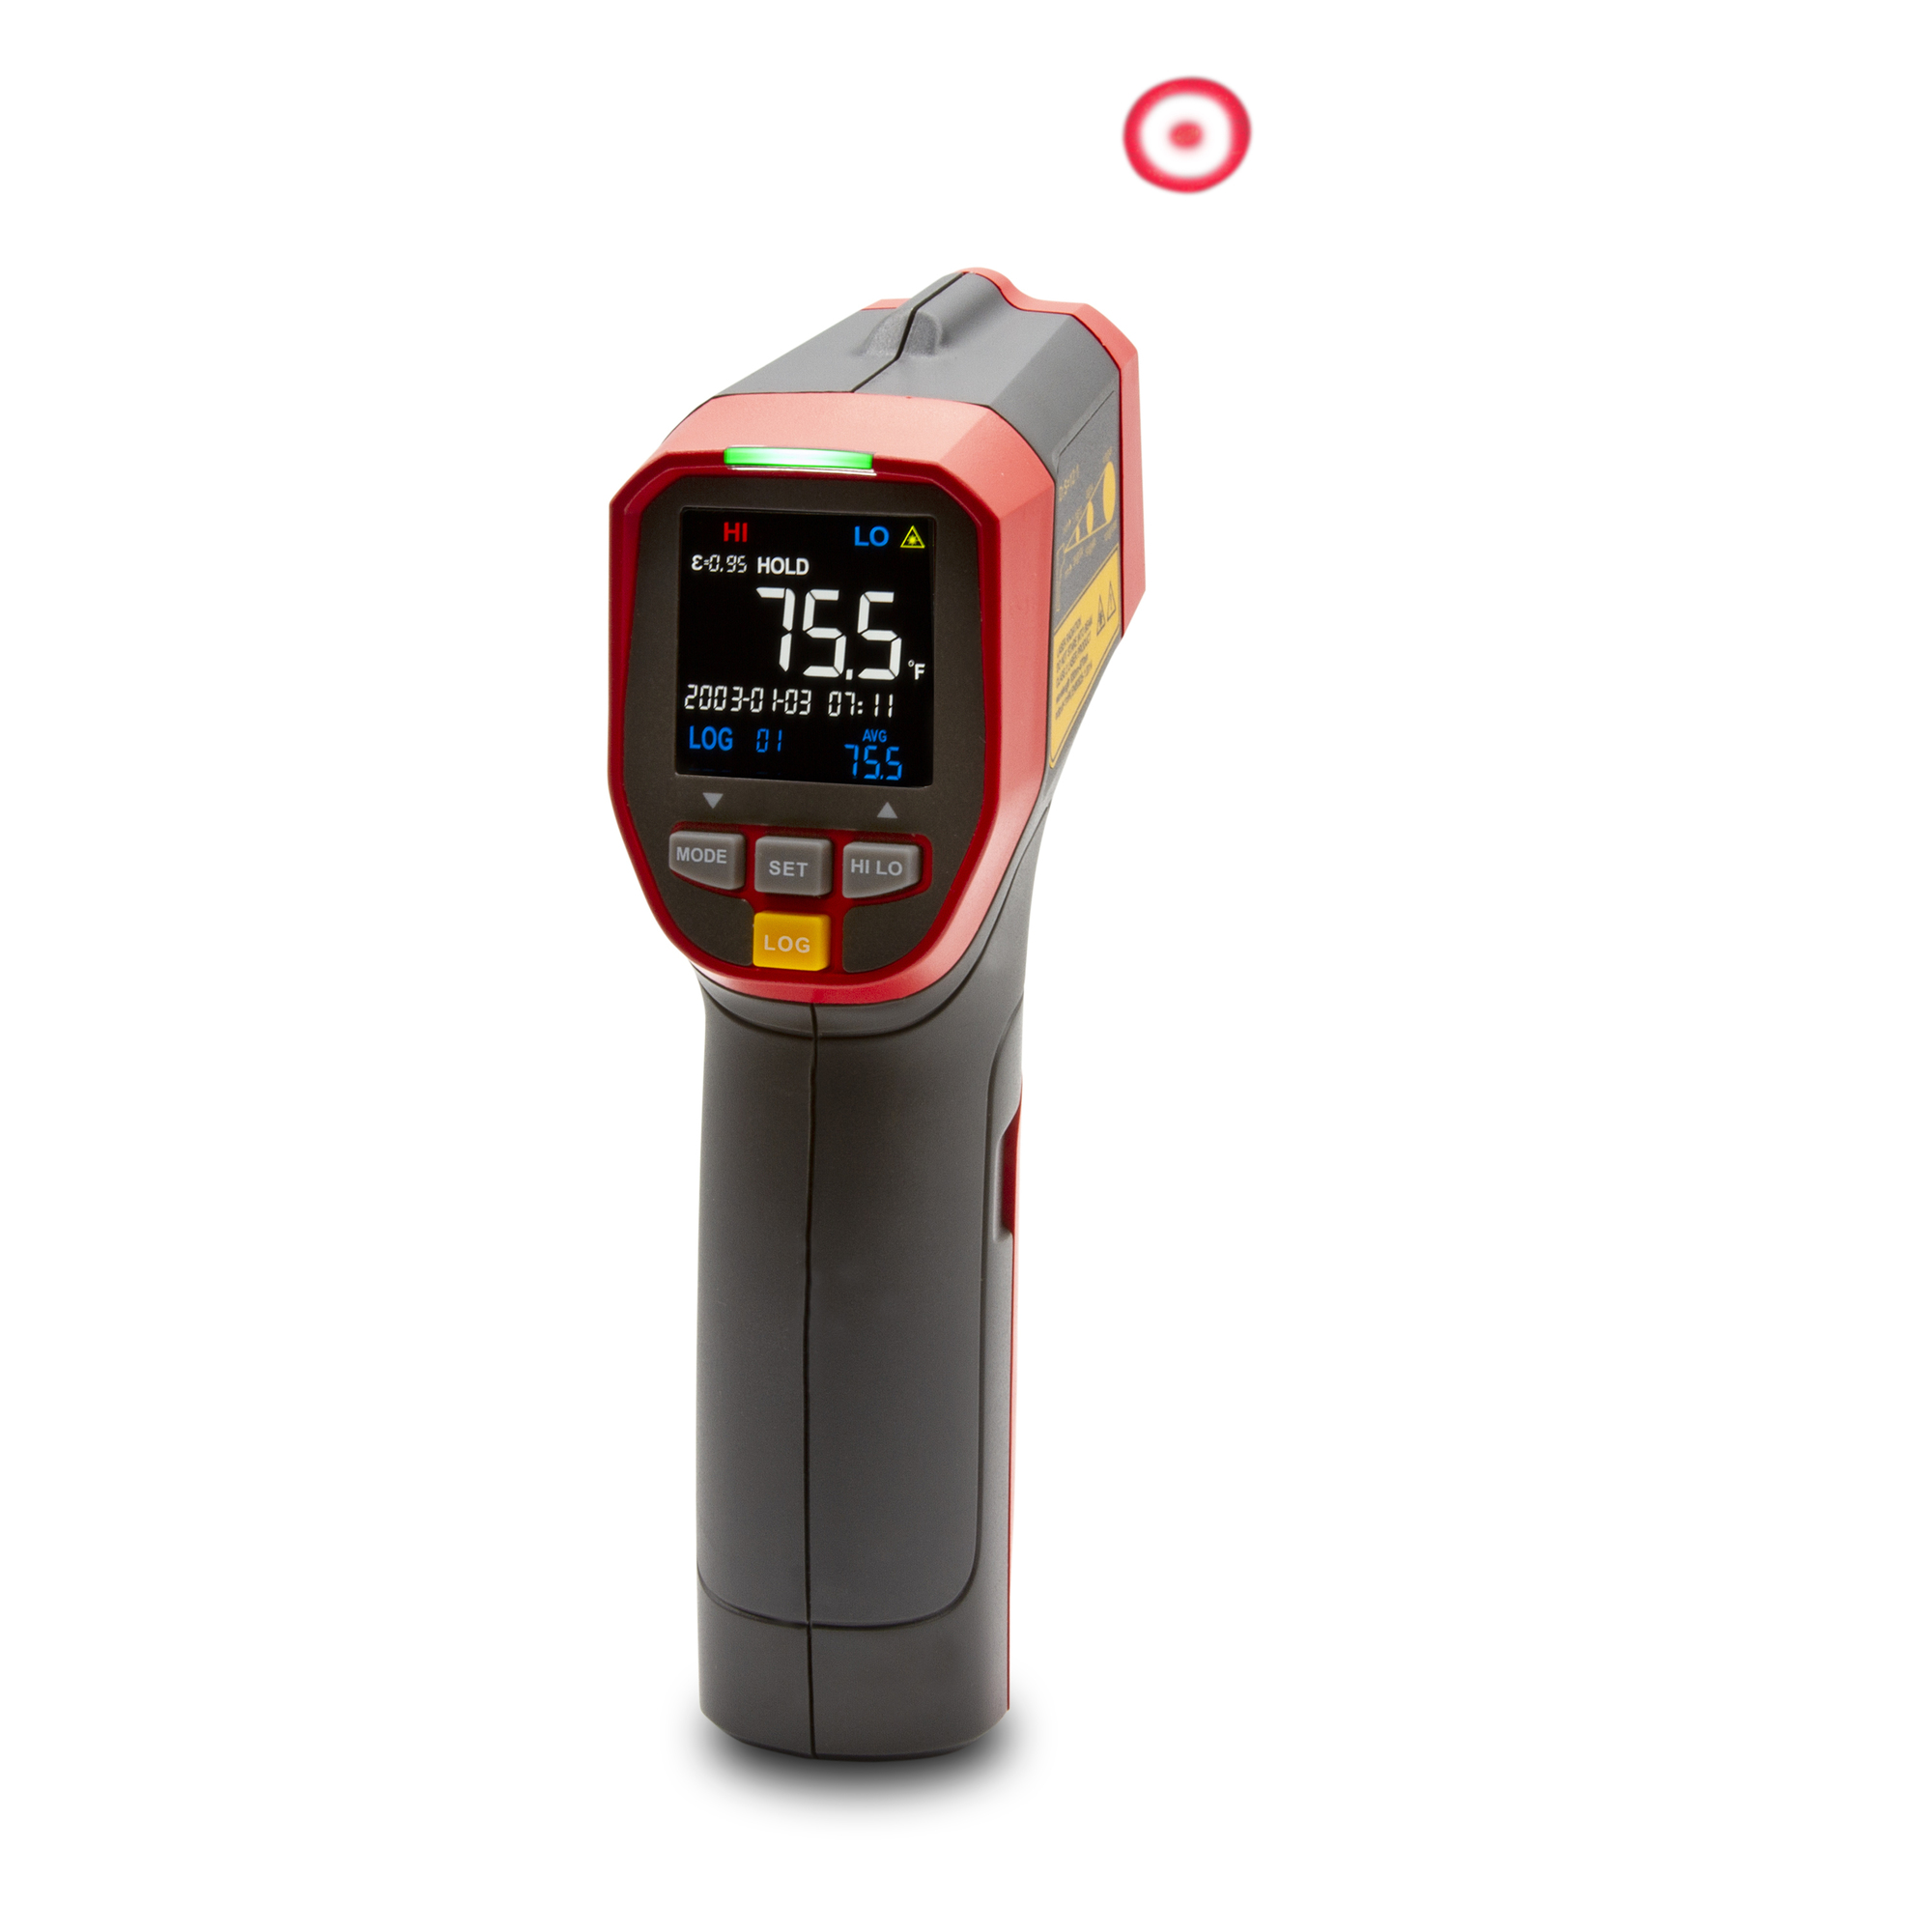 Triplett, 12:1Inchfrared Thermometer with Circular Laser, Model IRT350